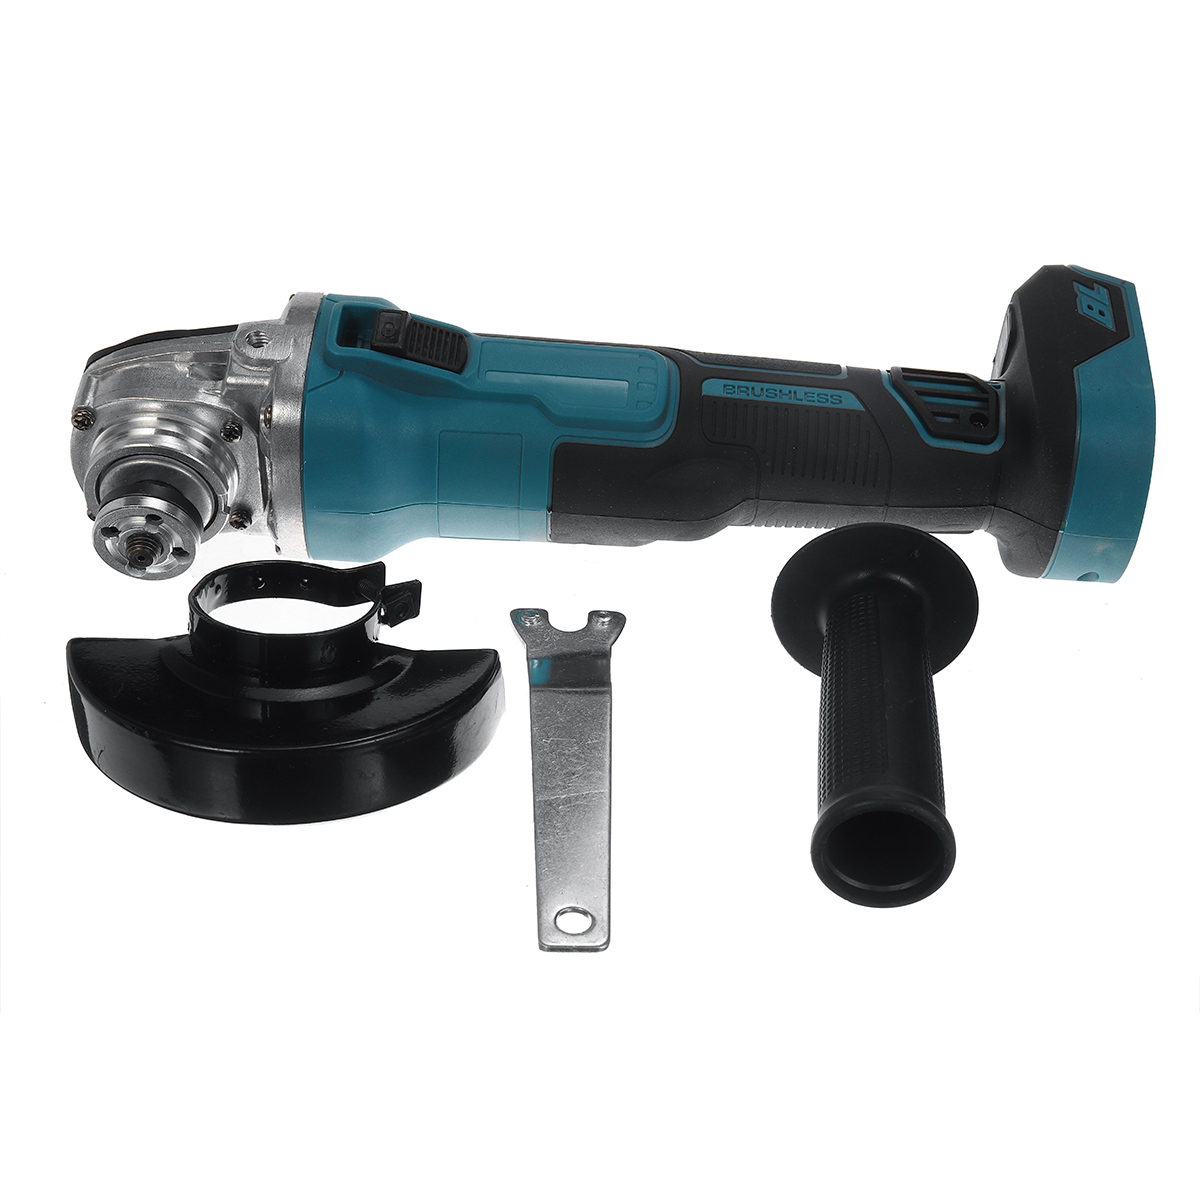 Drillpro-388VF-100mm125mm-Brushless-Angle-Grinder-Rechargeable-Electric-Cutting-Grinding-Tool-W-12-B-1861855-9